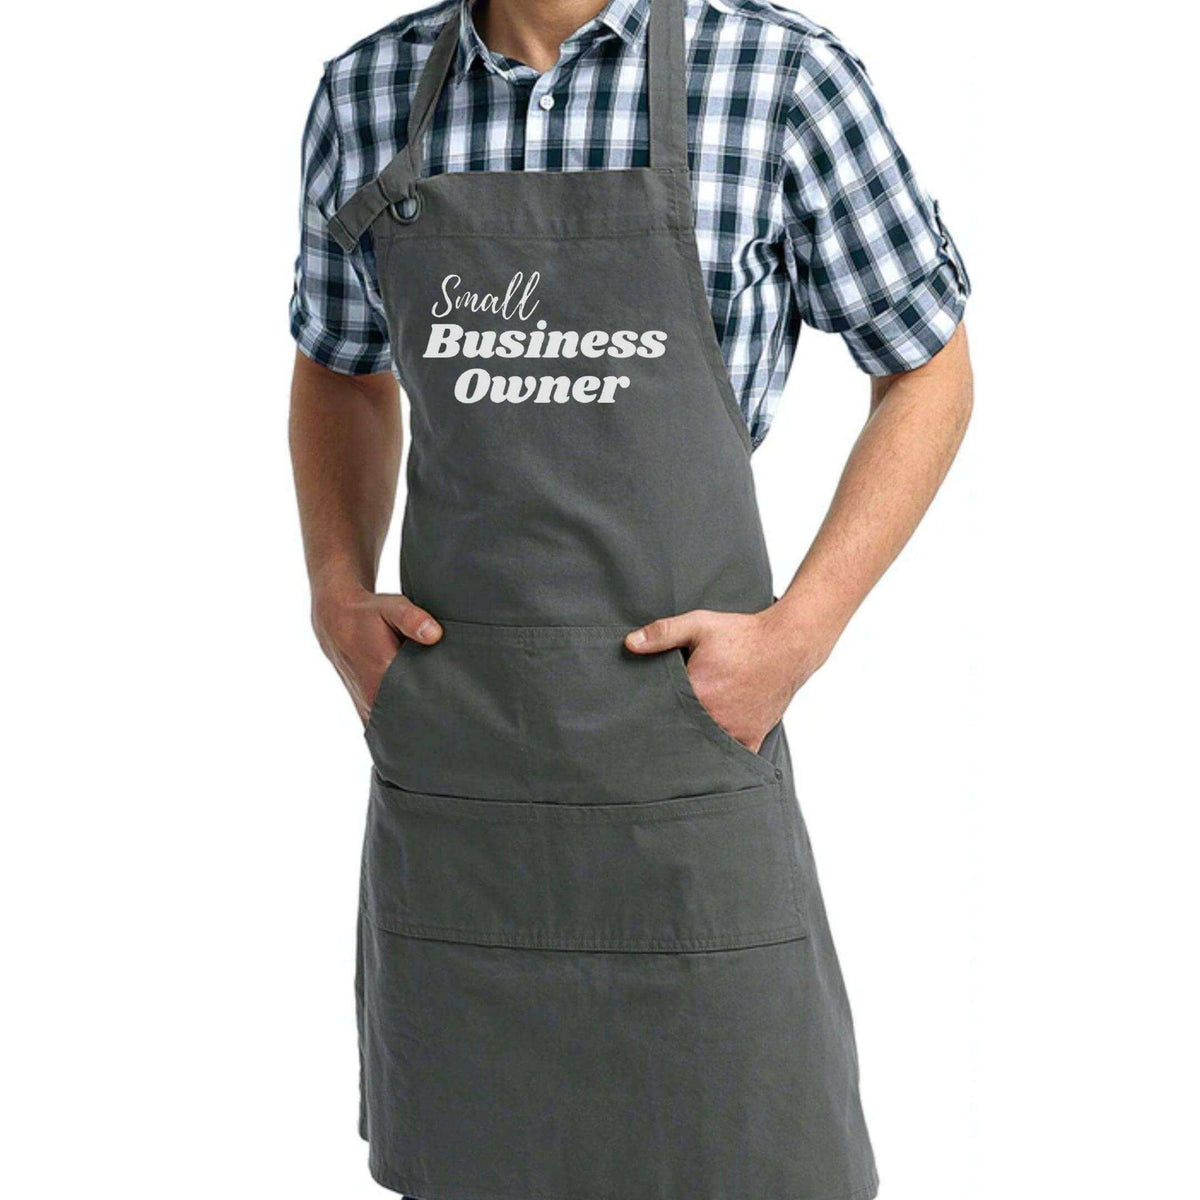 Small Business Owner, Business Apron, Cotton Canvas Artisan Bib Apron, Small Business Gift, Small Business Supplies, Vendor Display Booth - Winks Design Studio,LLC